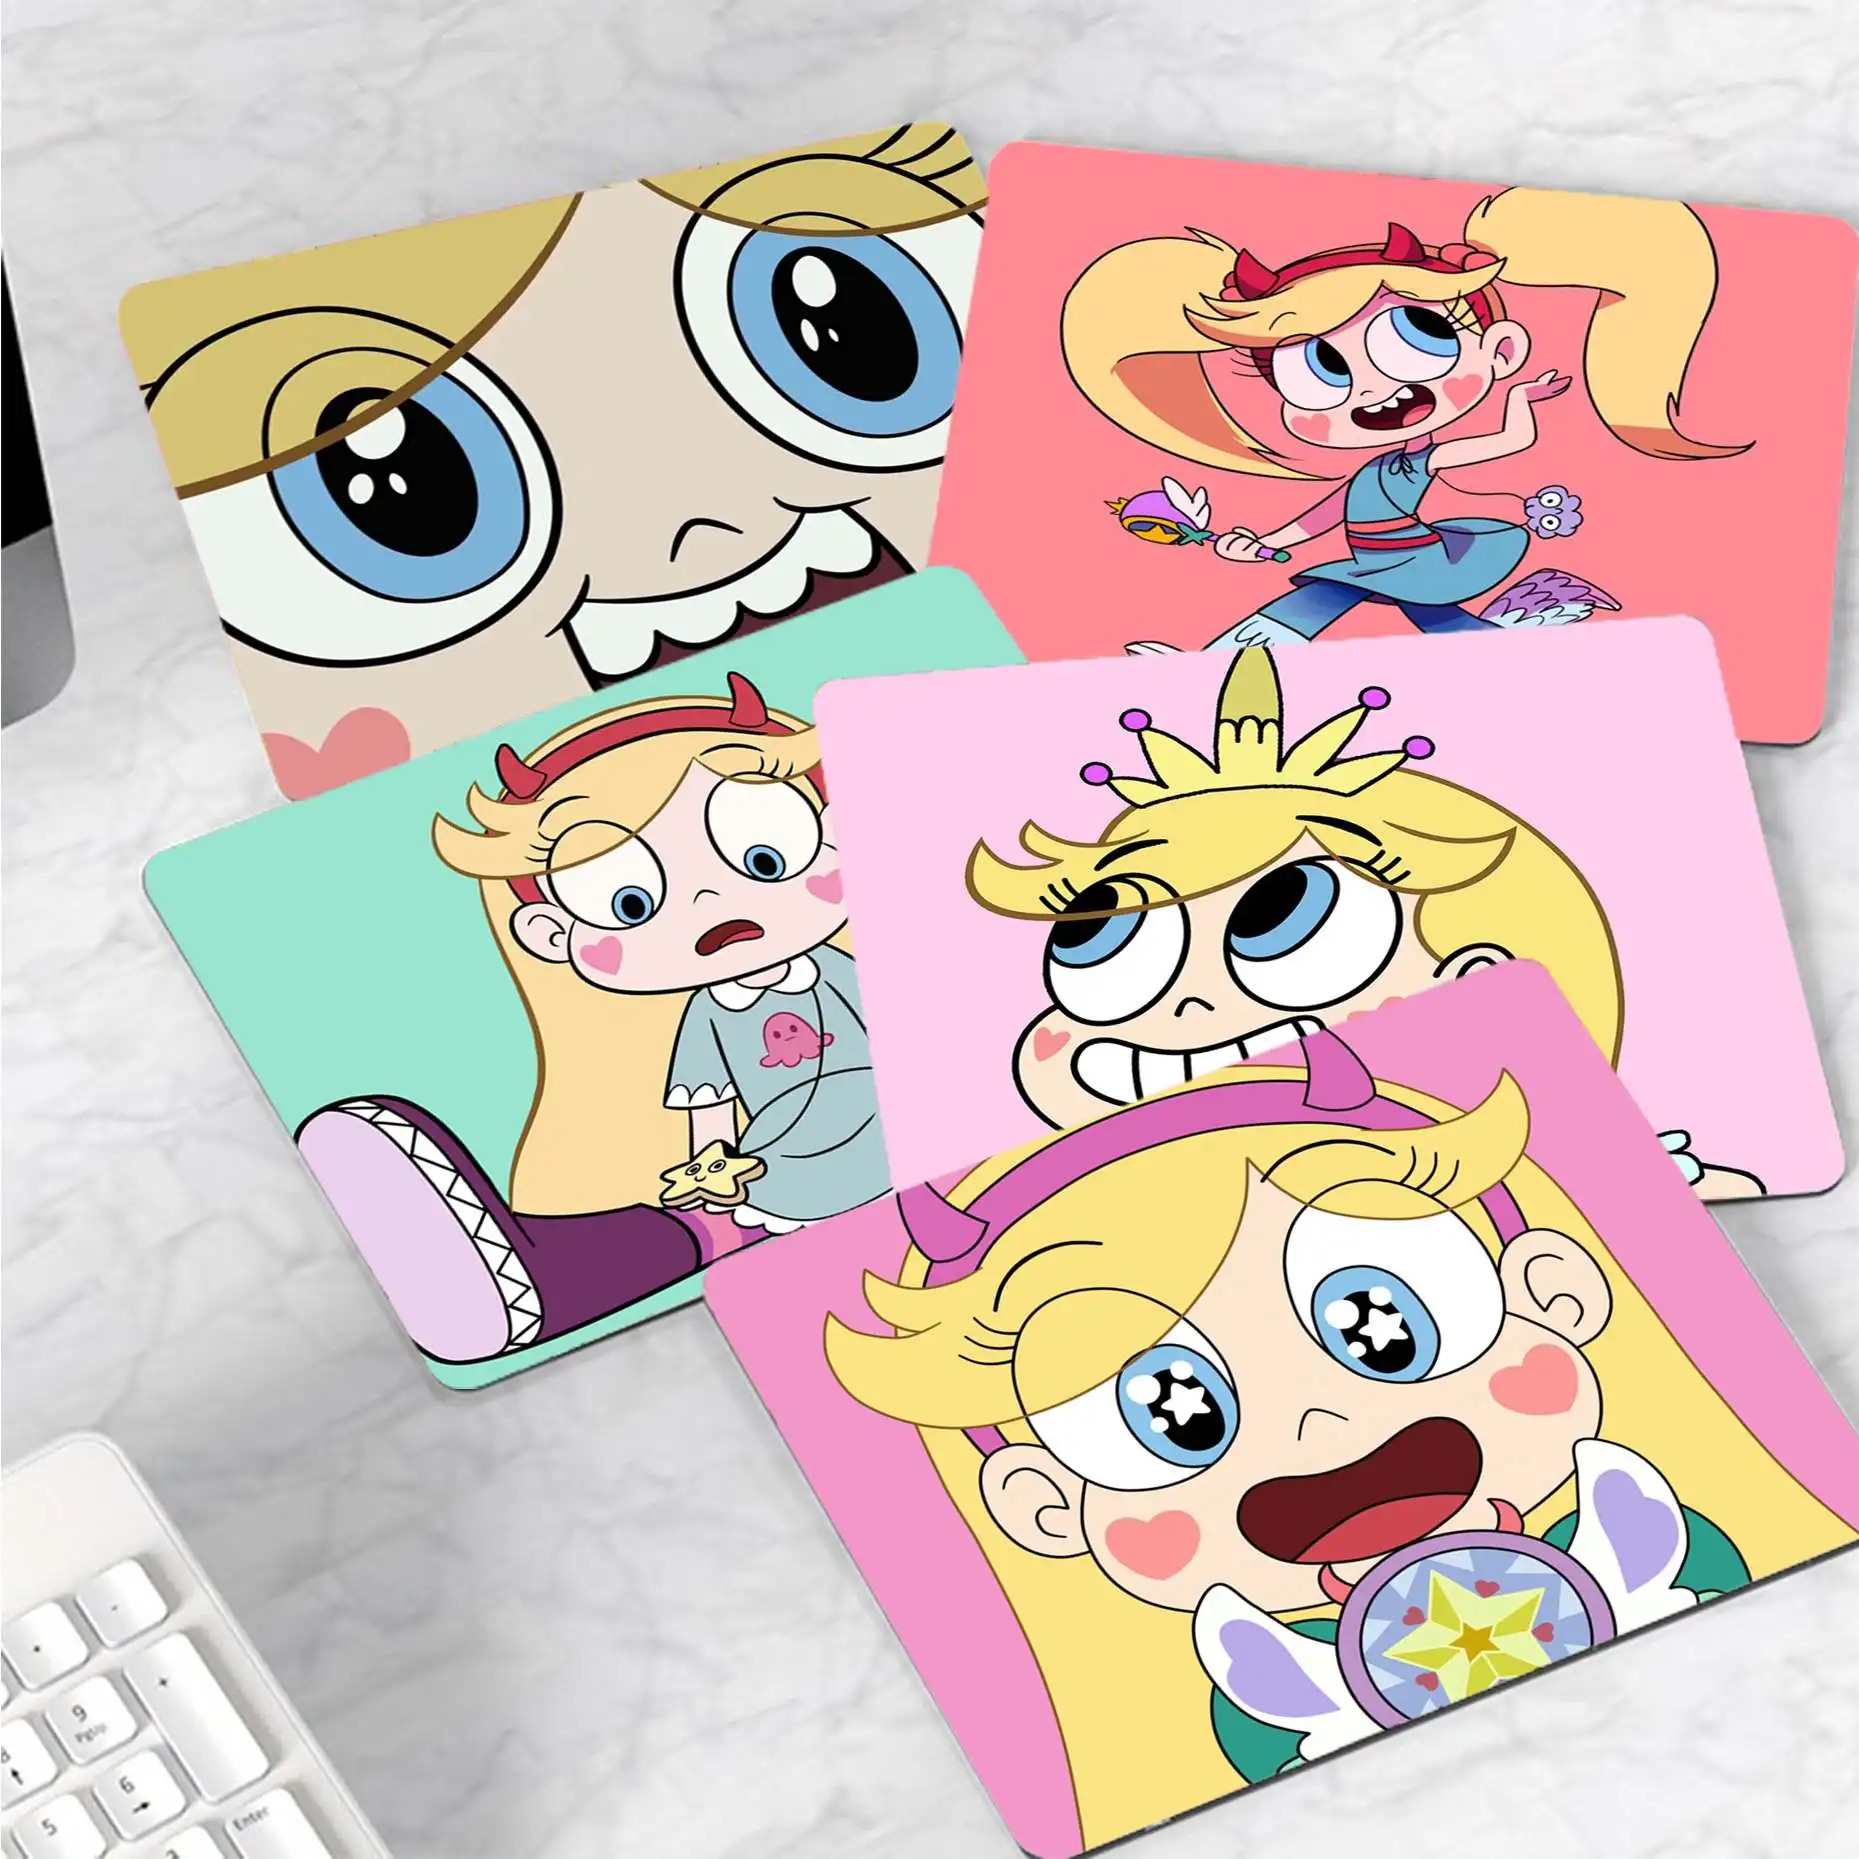 

Disney Star butterfly Princess Star vs. the Forces of Evil Desktop Pad Game Mousepad Smooth Writing Pad Desktops Mate mouse pad